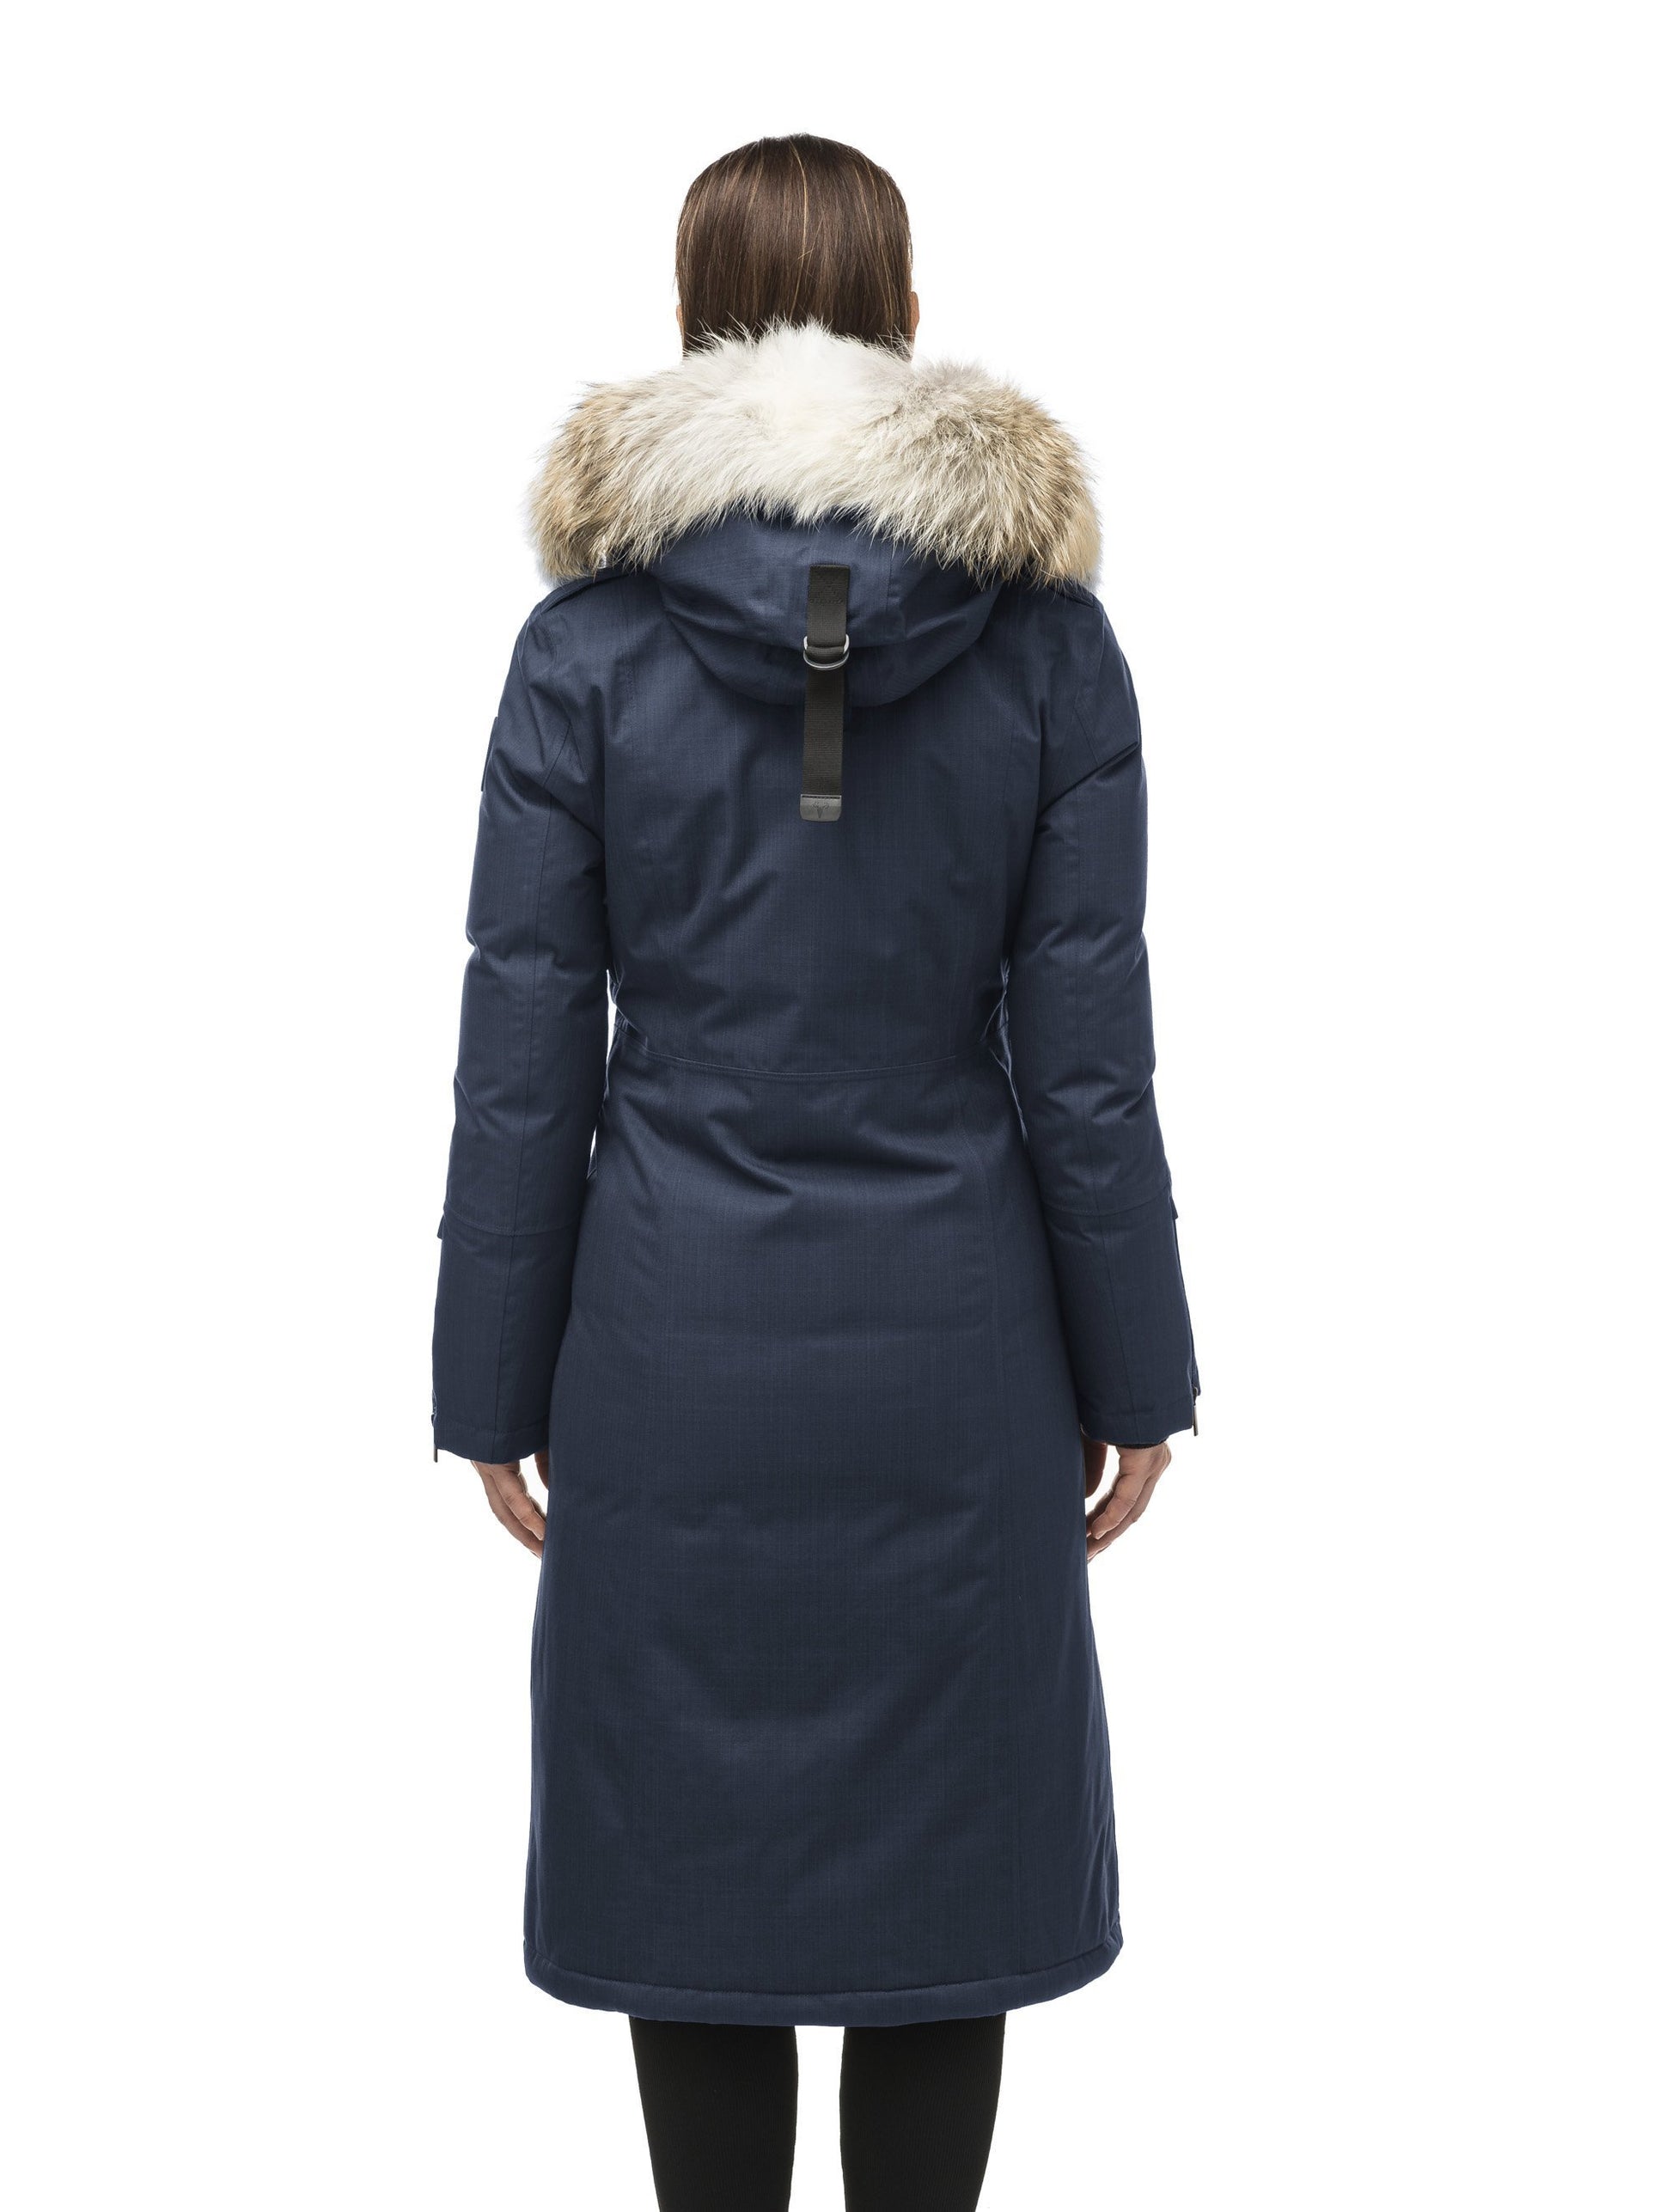 Long calf length women's trench inspired parka with removable fur trim around the hood and an asymetric closure in Navy